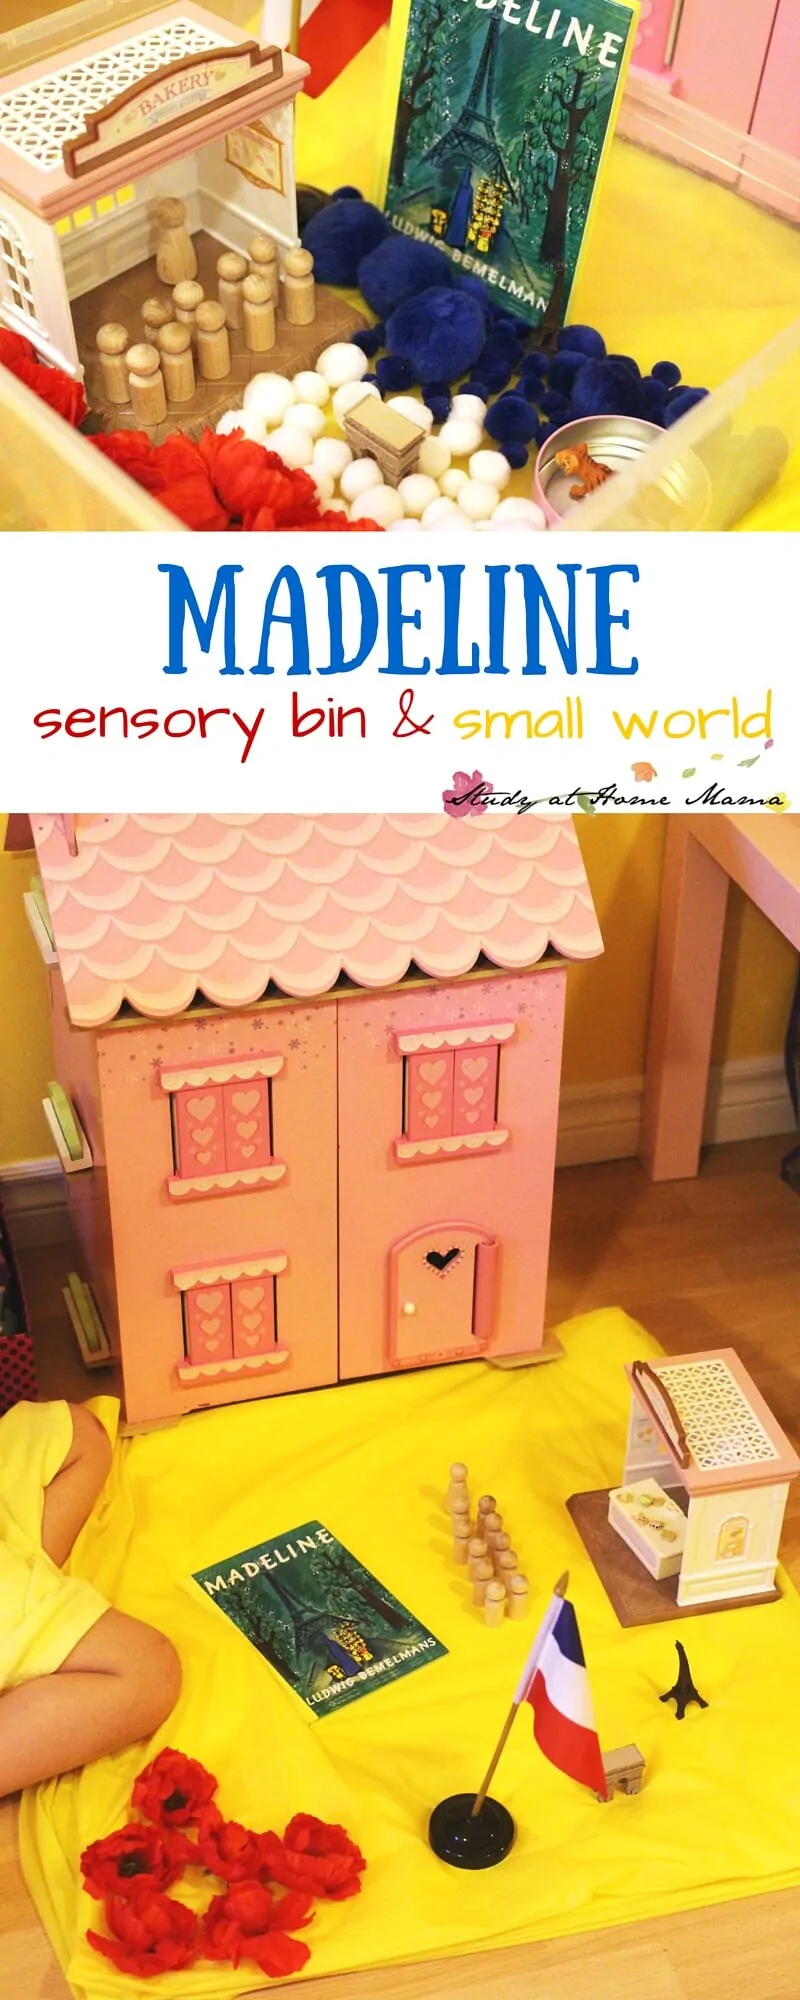 Madeline sensory bin and small world set-up. Read Madeline to your child as they engage in either of these fun sensory activities for kids, learning about French culture and incorporating a bit of math into the fun. Perfect for a Madeline unit study